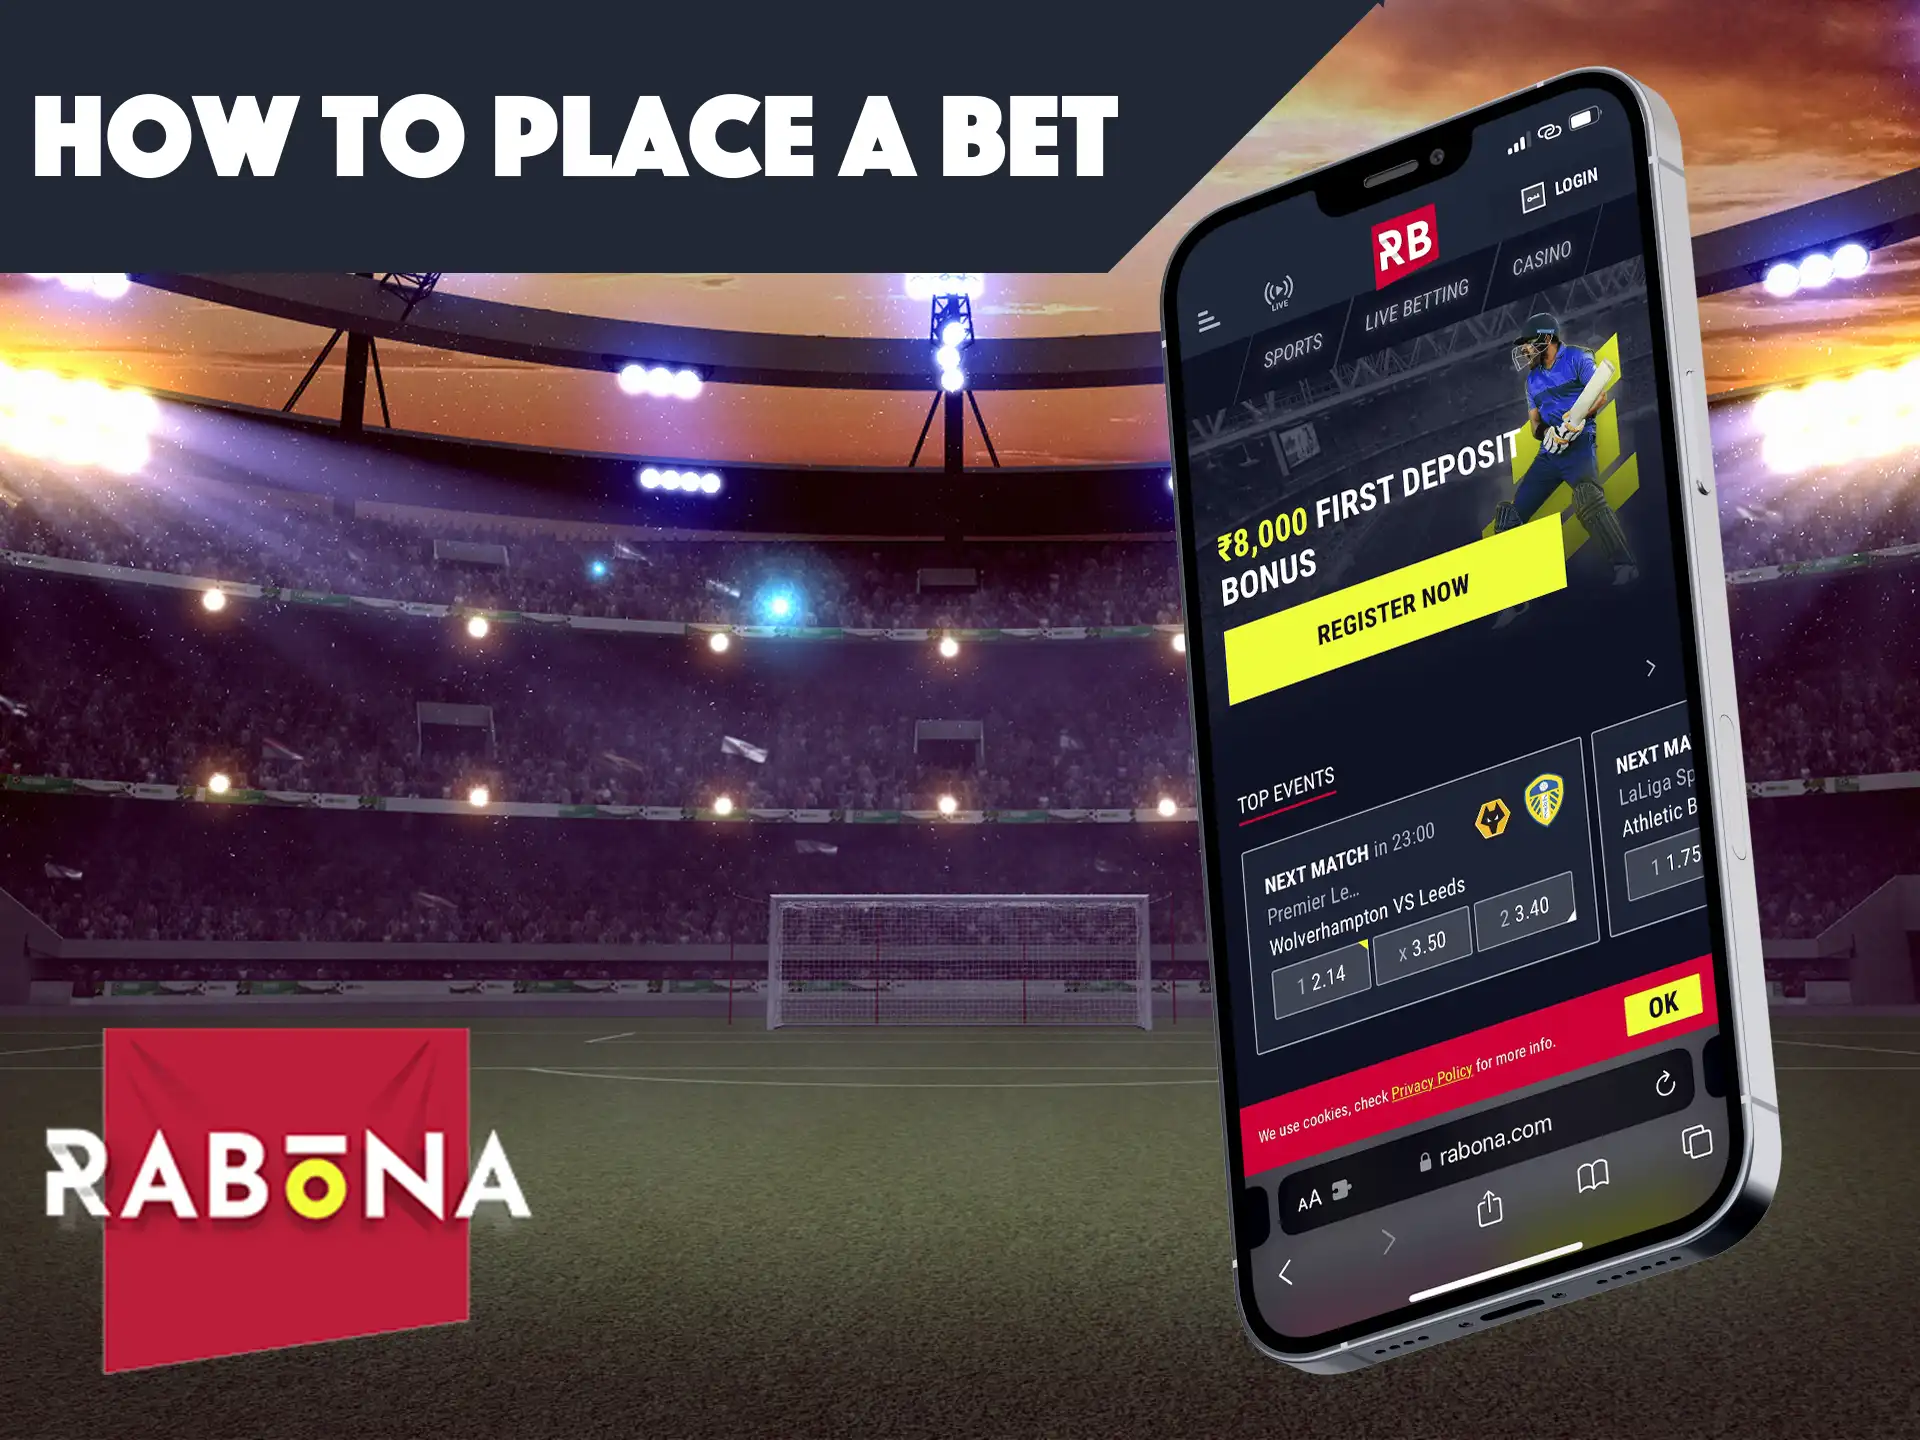 You can bet both from your mobile phone and computer in Rabona.